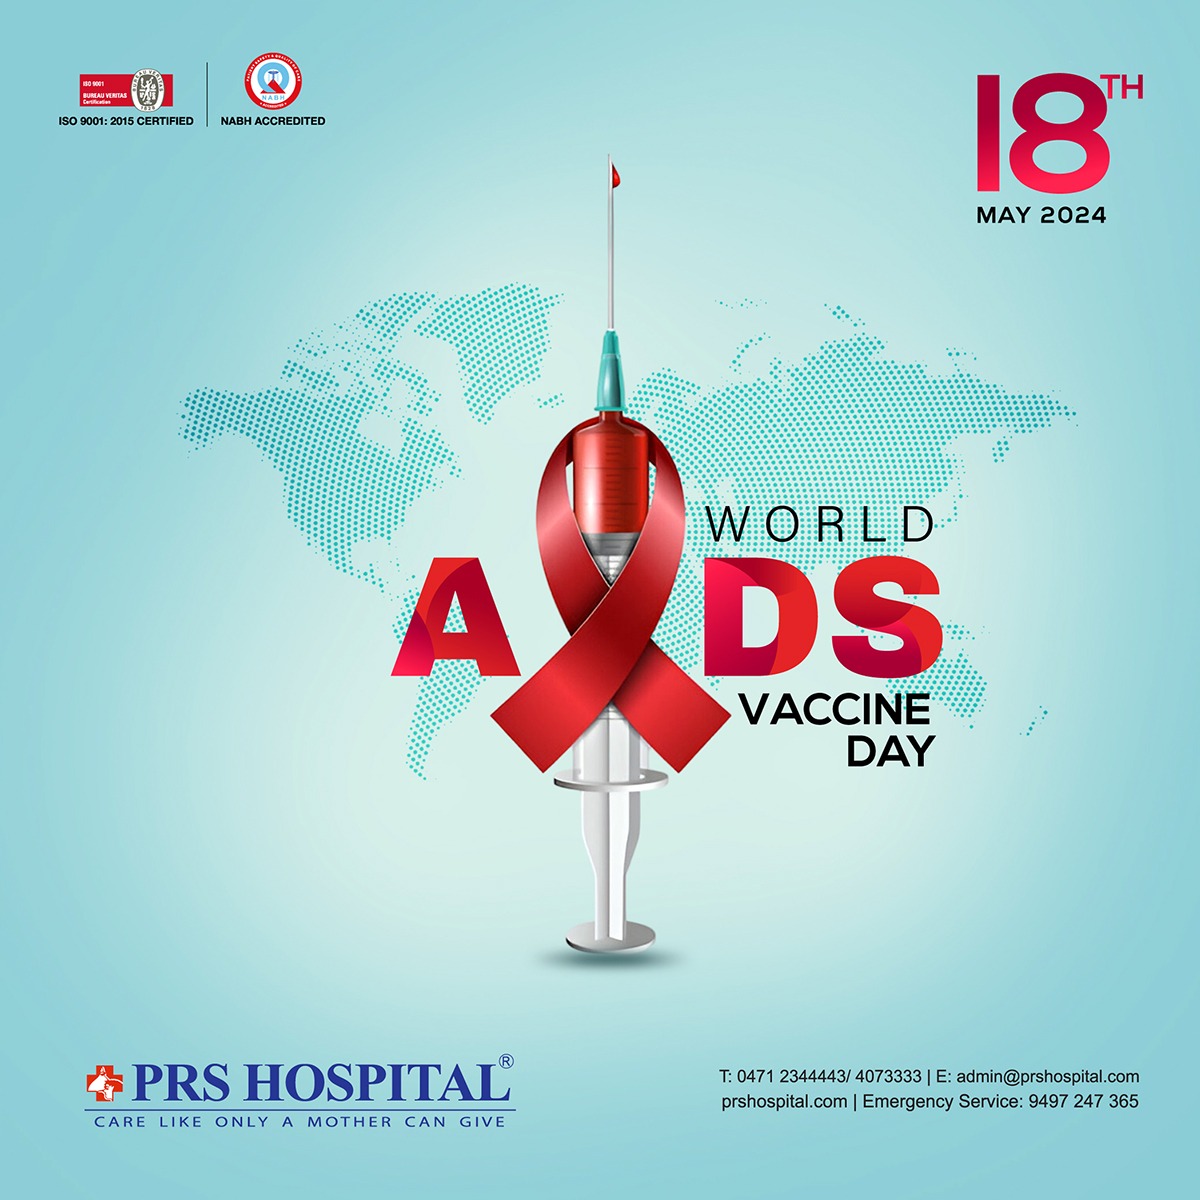 'Together, we can end AIDS'

#VaccineAwareness #AIDS #AIDSvaccineday #healthy #prshospital #besthospital #aidsprevention